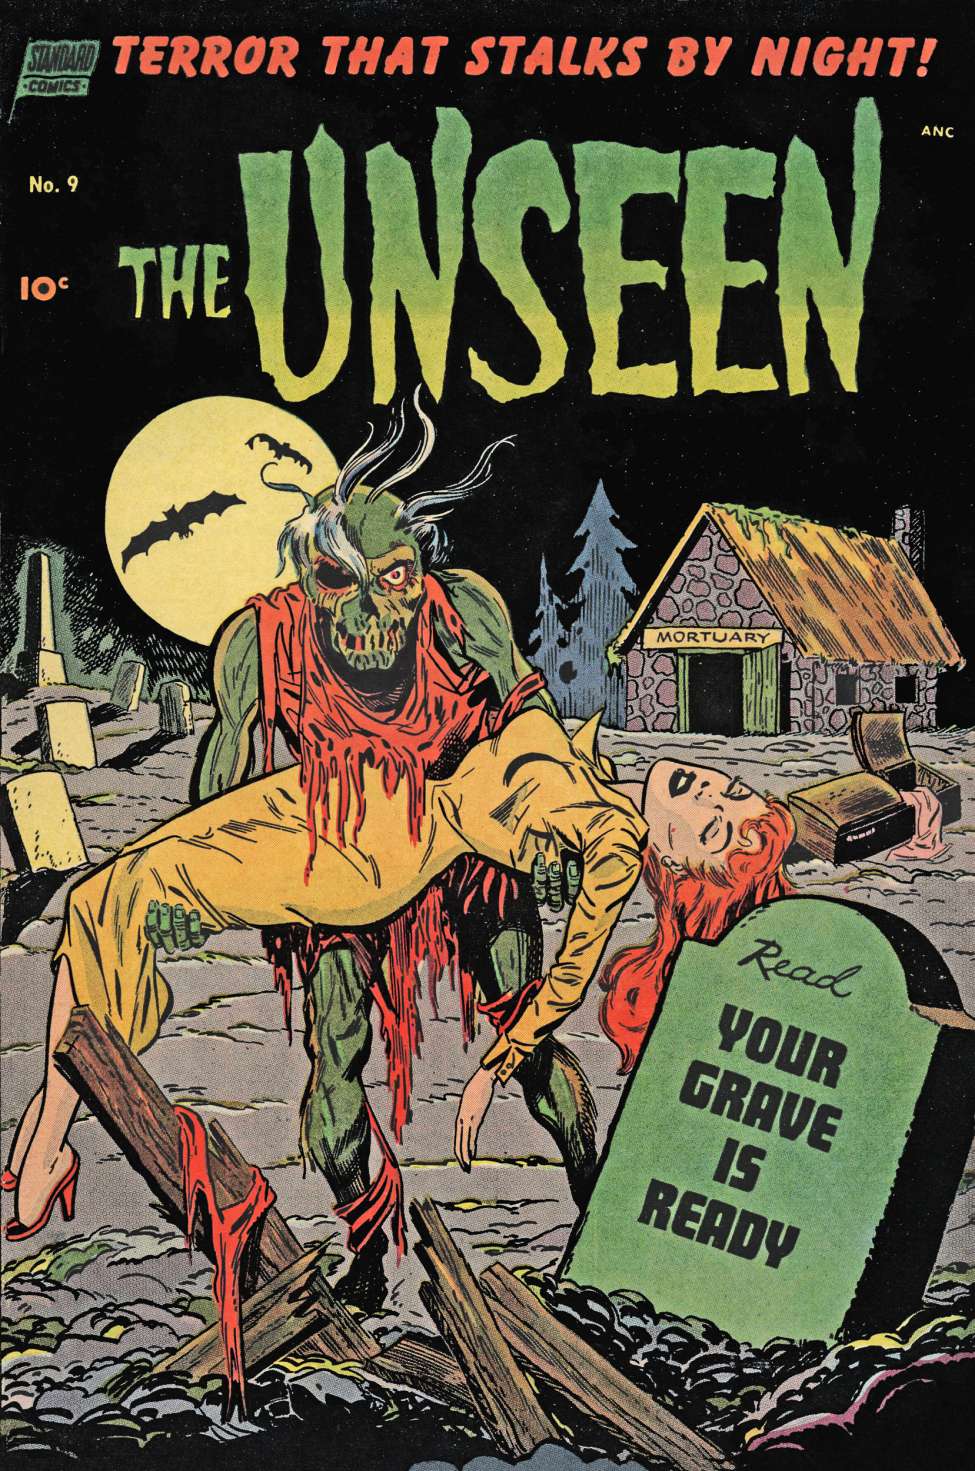 Comic Book Cover For The Unseen 9 (alt) - Version 2